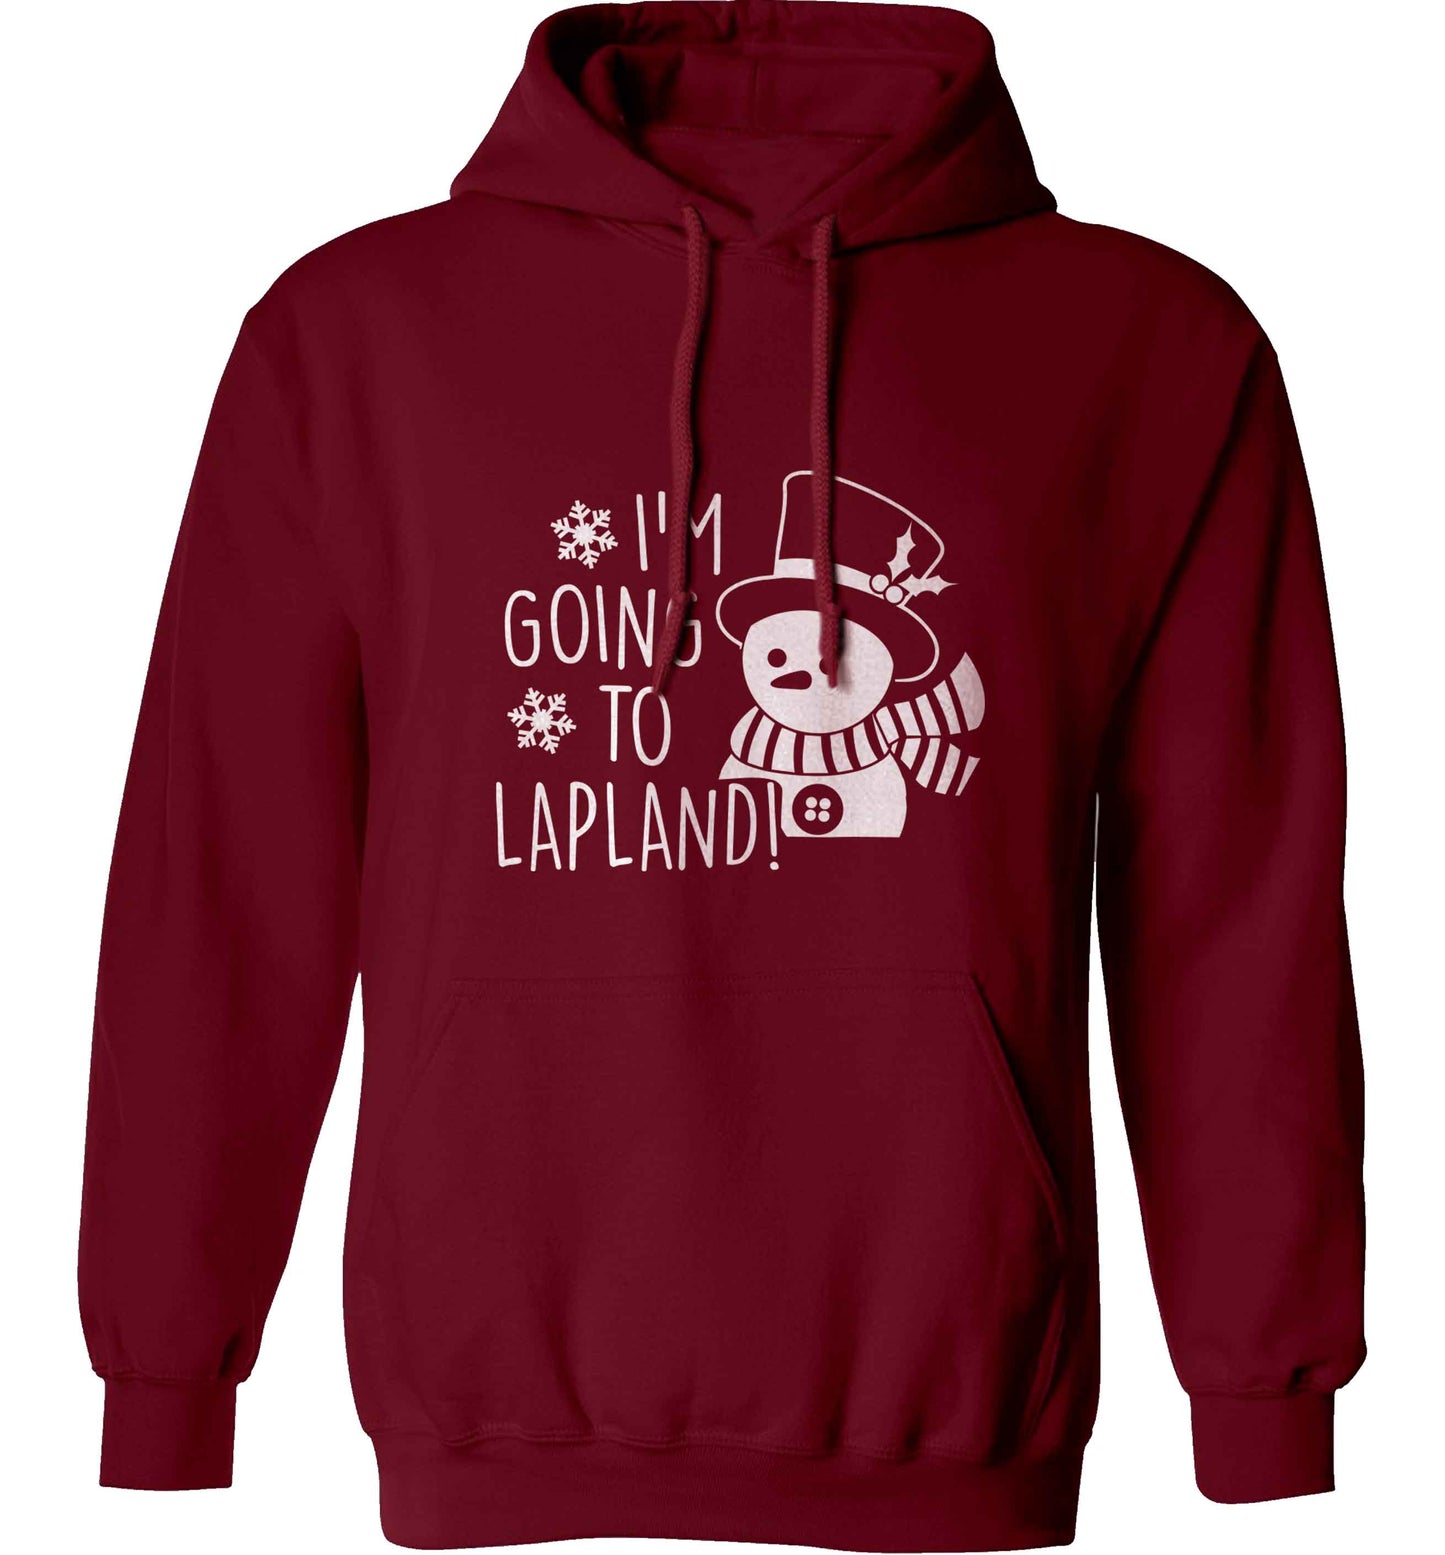 I'm going to Lapland adults unisex maroon hoodie 2XL